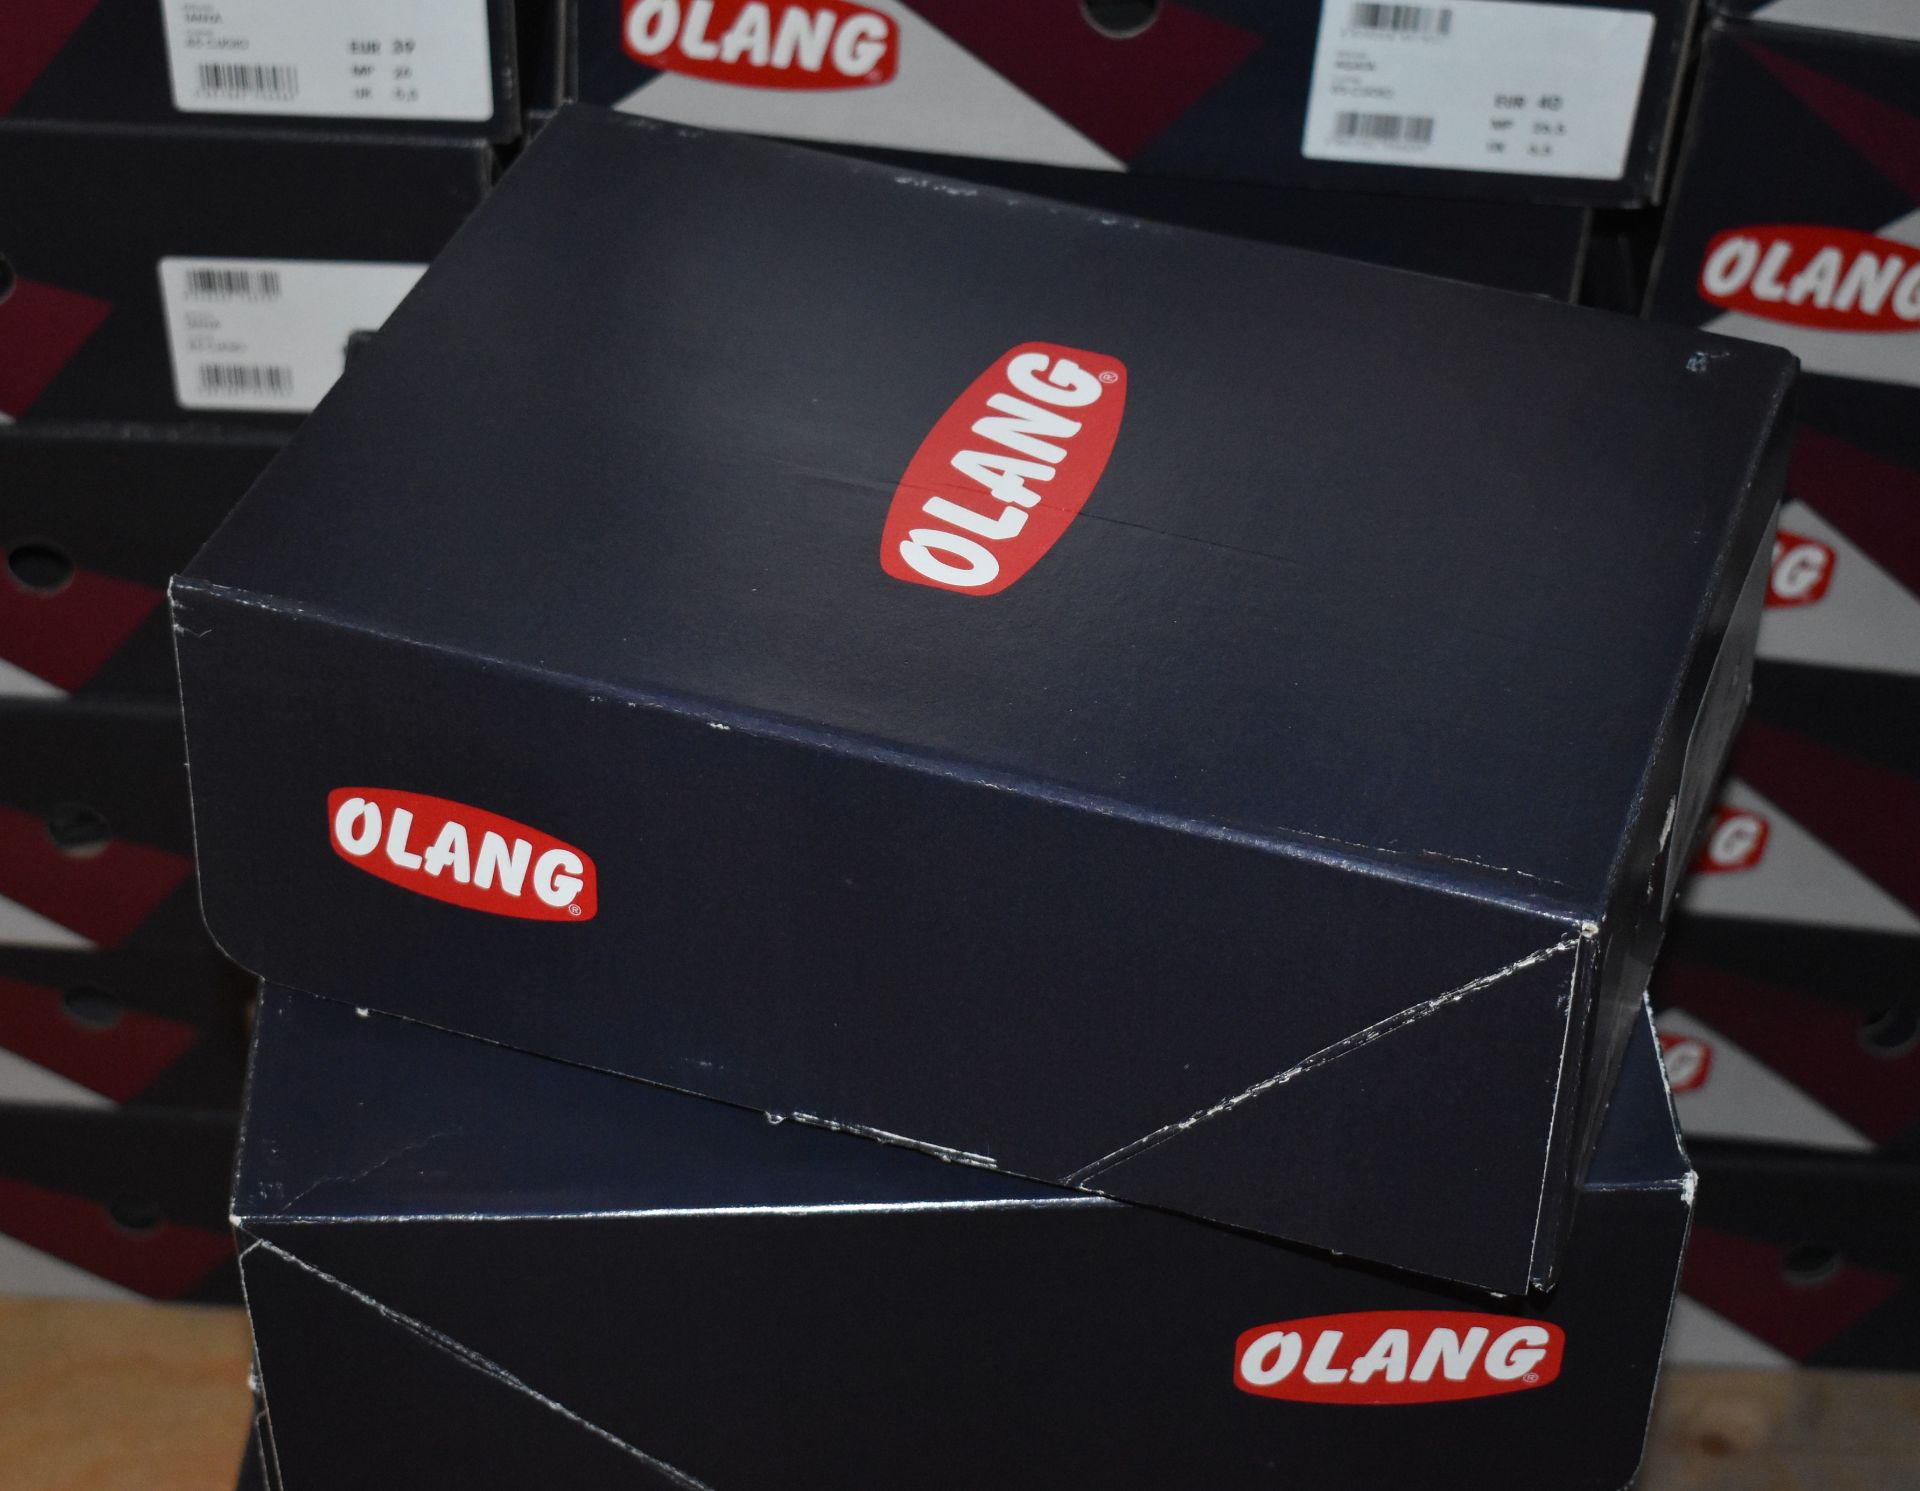 1 x Pair of Designer Olang Merano 82 Blu Women's Winter Boots - Euro Size 38 - Brand New Boxed Stock - Image 4 of 4